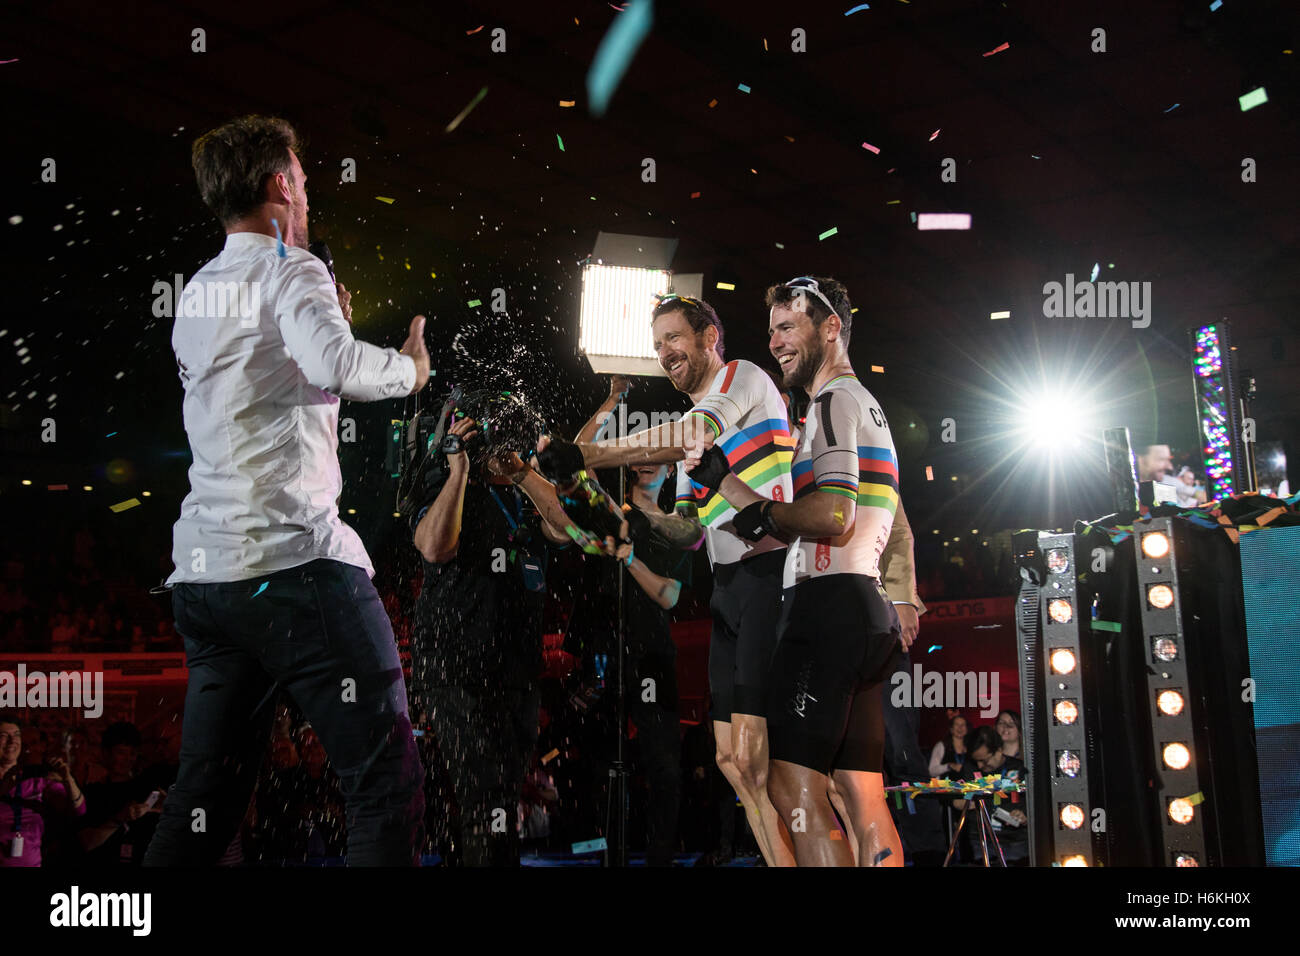 London, UK  30th October, 2016.   Cyclists compete  in the final day of  the London Six Day cycling event.  Lee Valley Velodrome, Olympic Park, London, UK. Bradley Wiggins and Mark Cavendish finish second. Bradley Wiggins pours champagne over the presenter.Copyright Carol Moir/Alamy Live News. Stock Photo